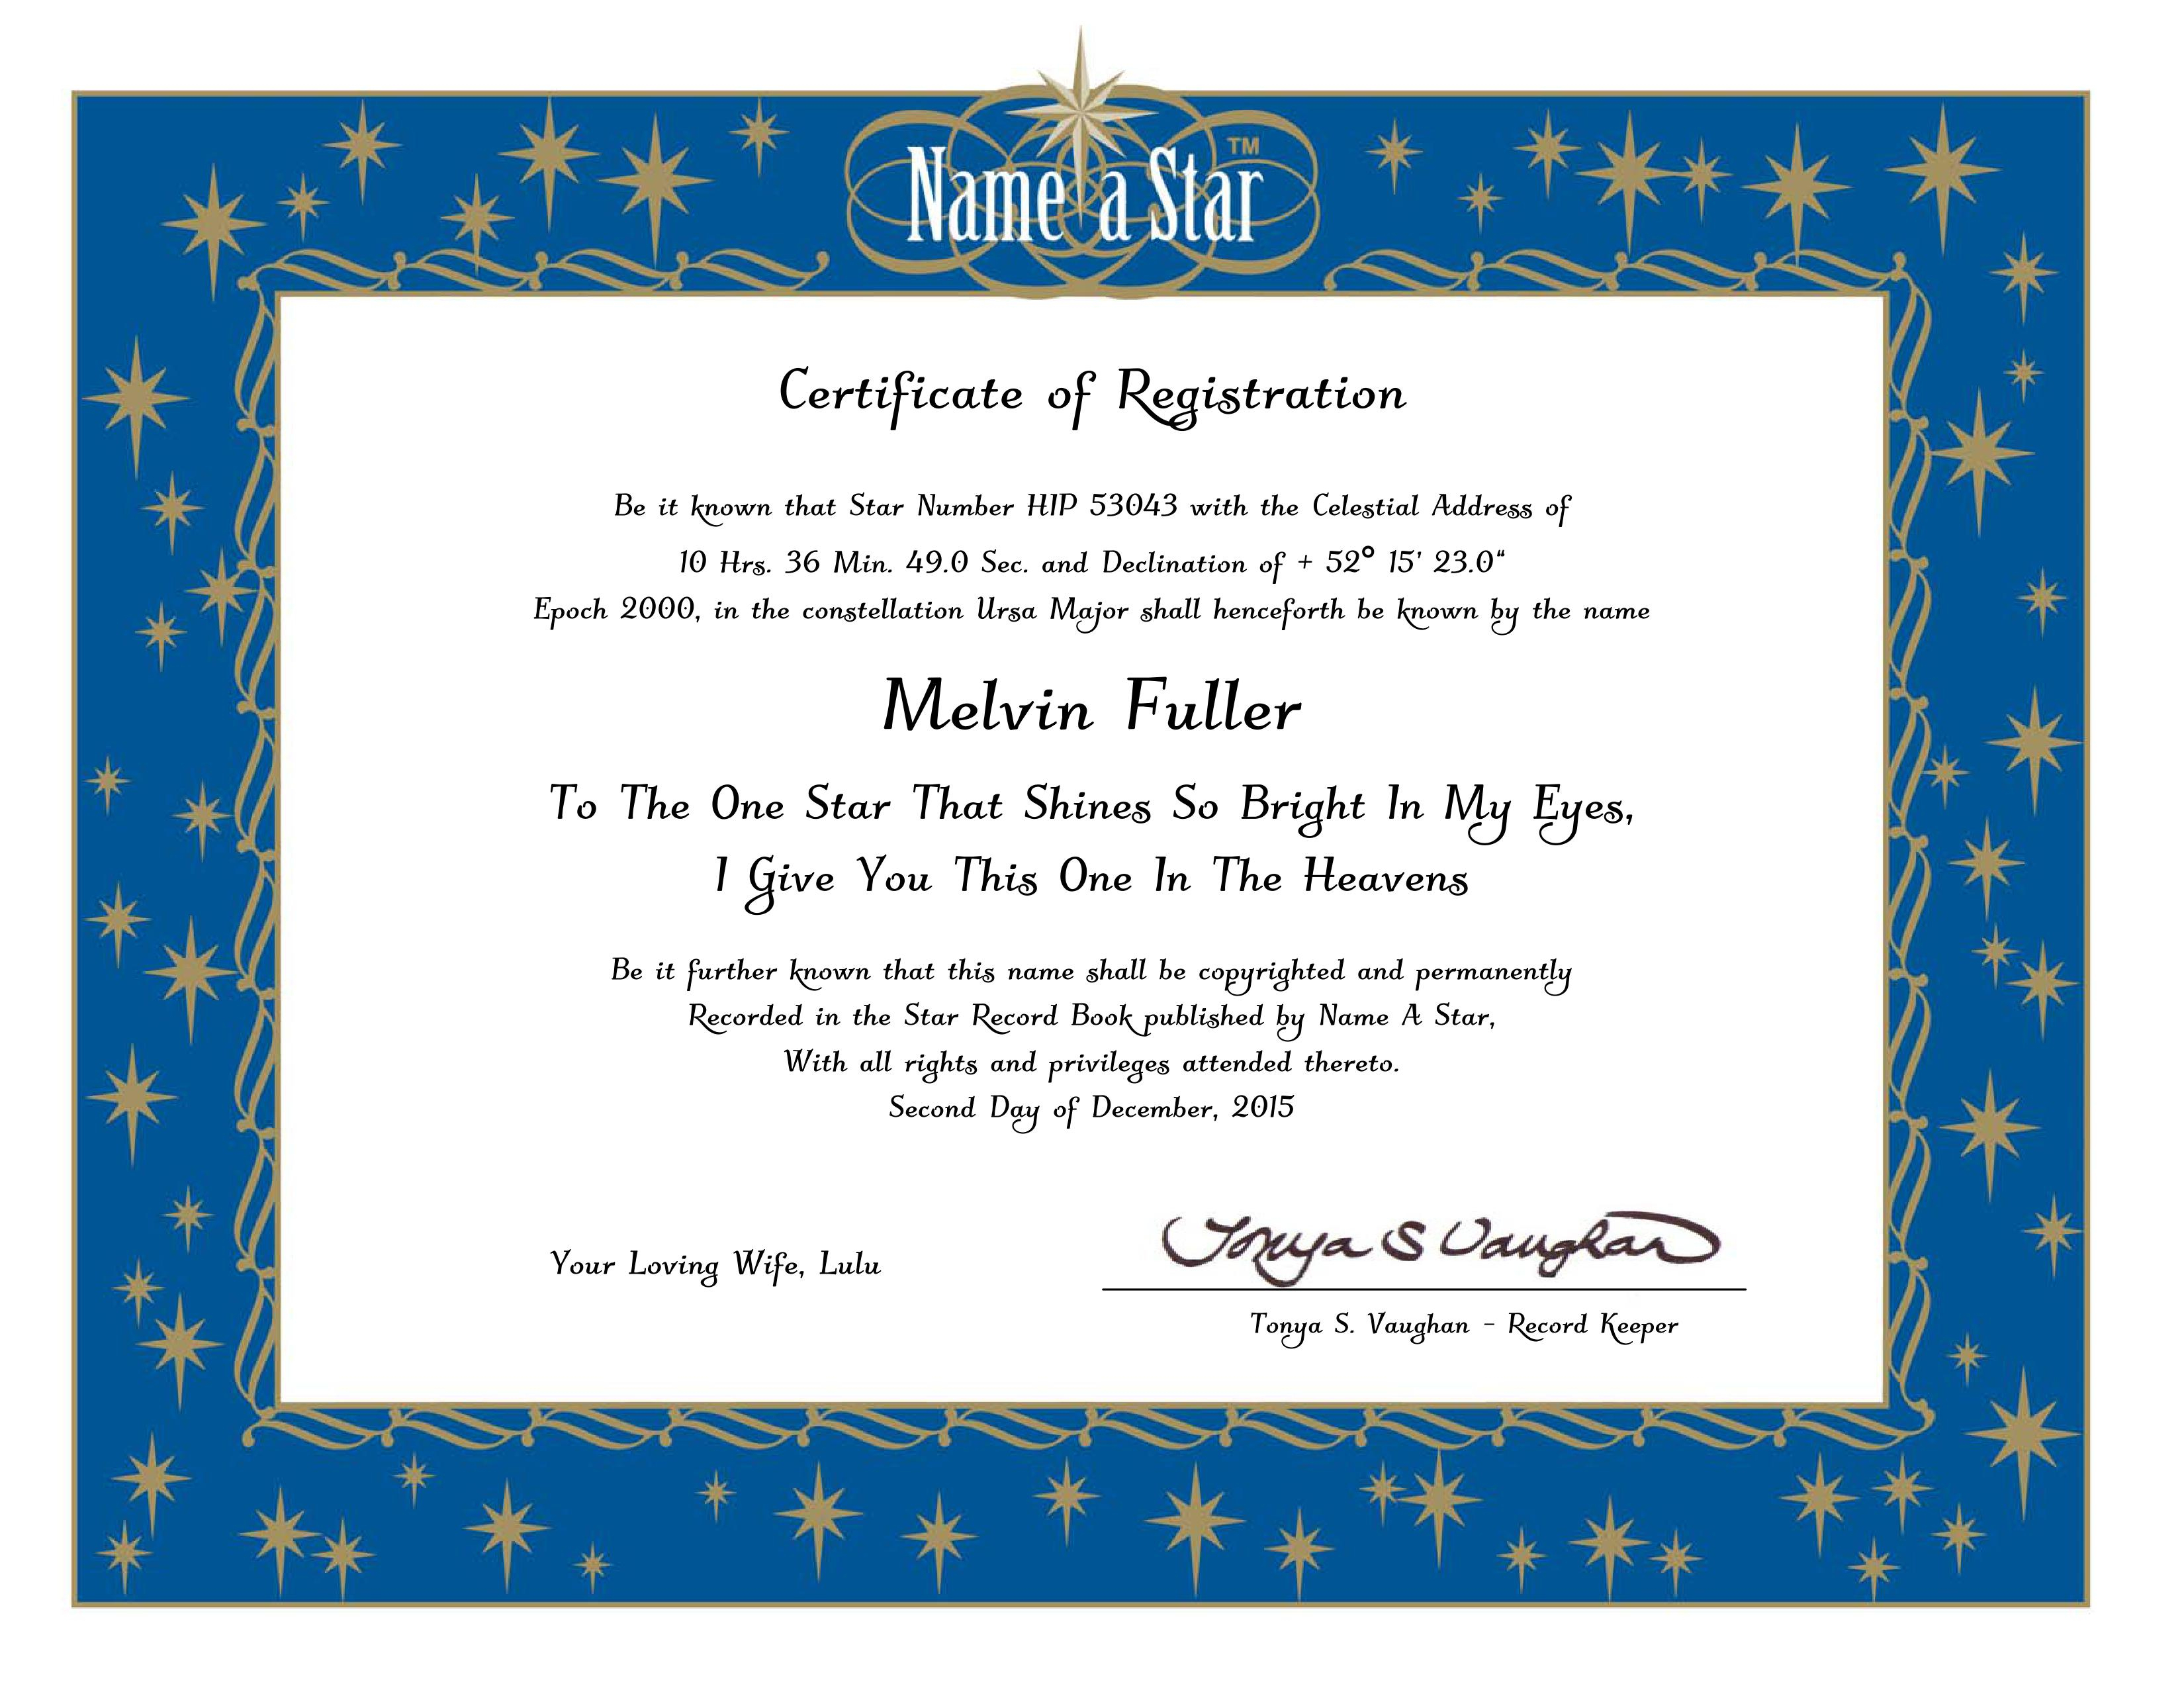 Name A Star Instant Certificate - Buy And Name A Star | Name A Star regarding Star Naming Certificate Template